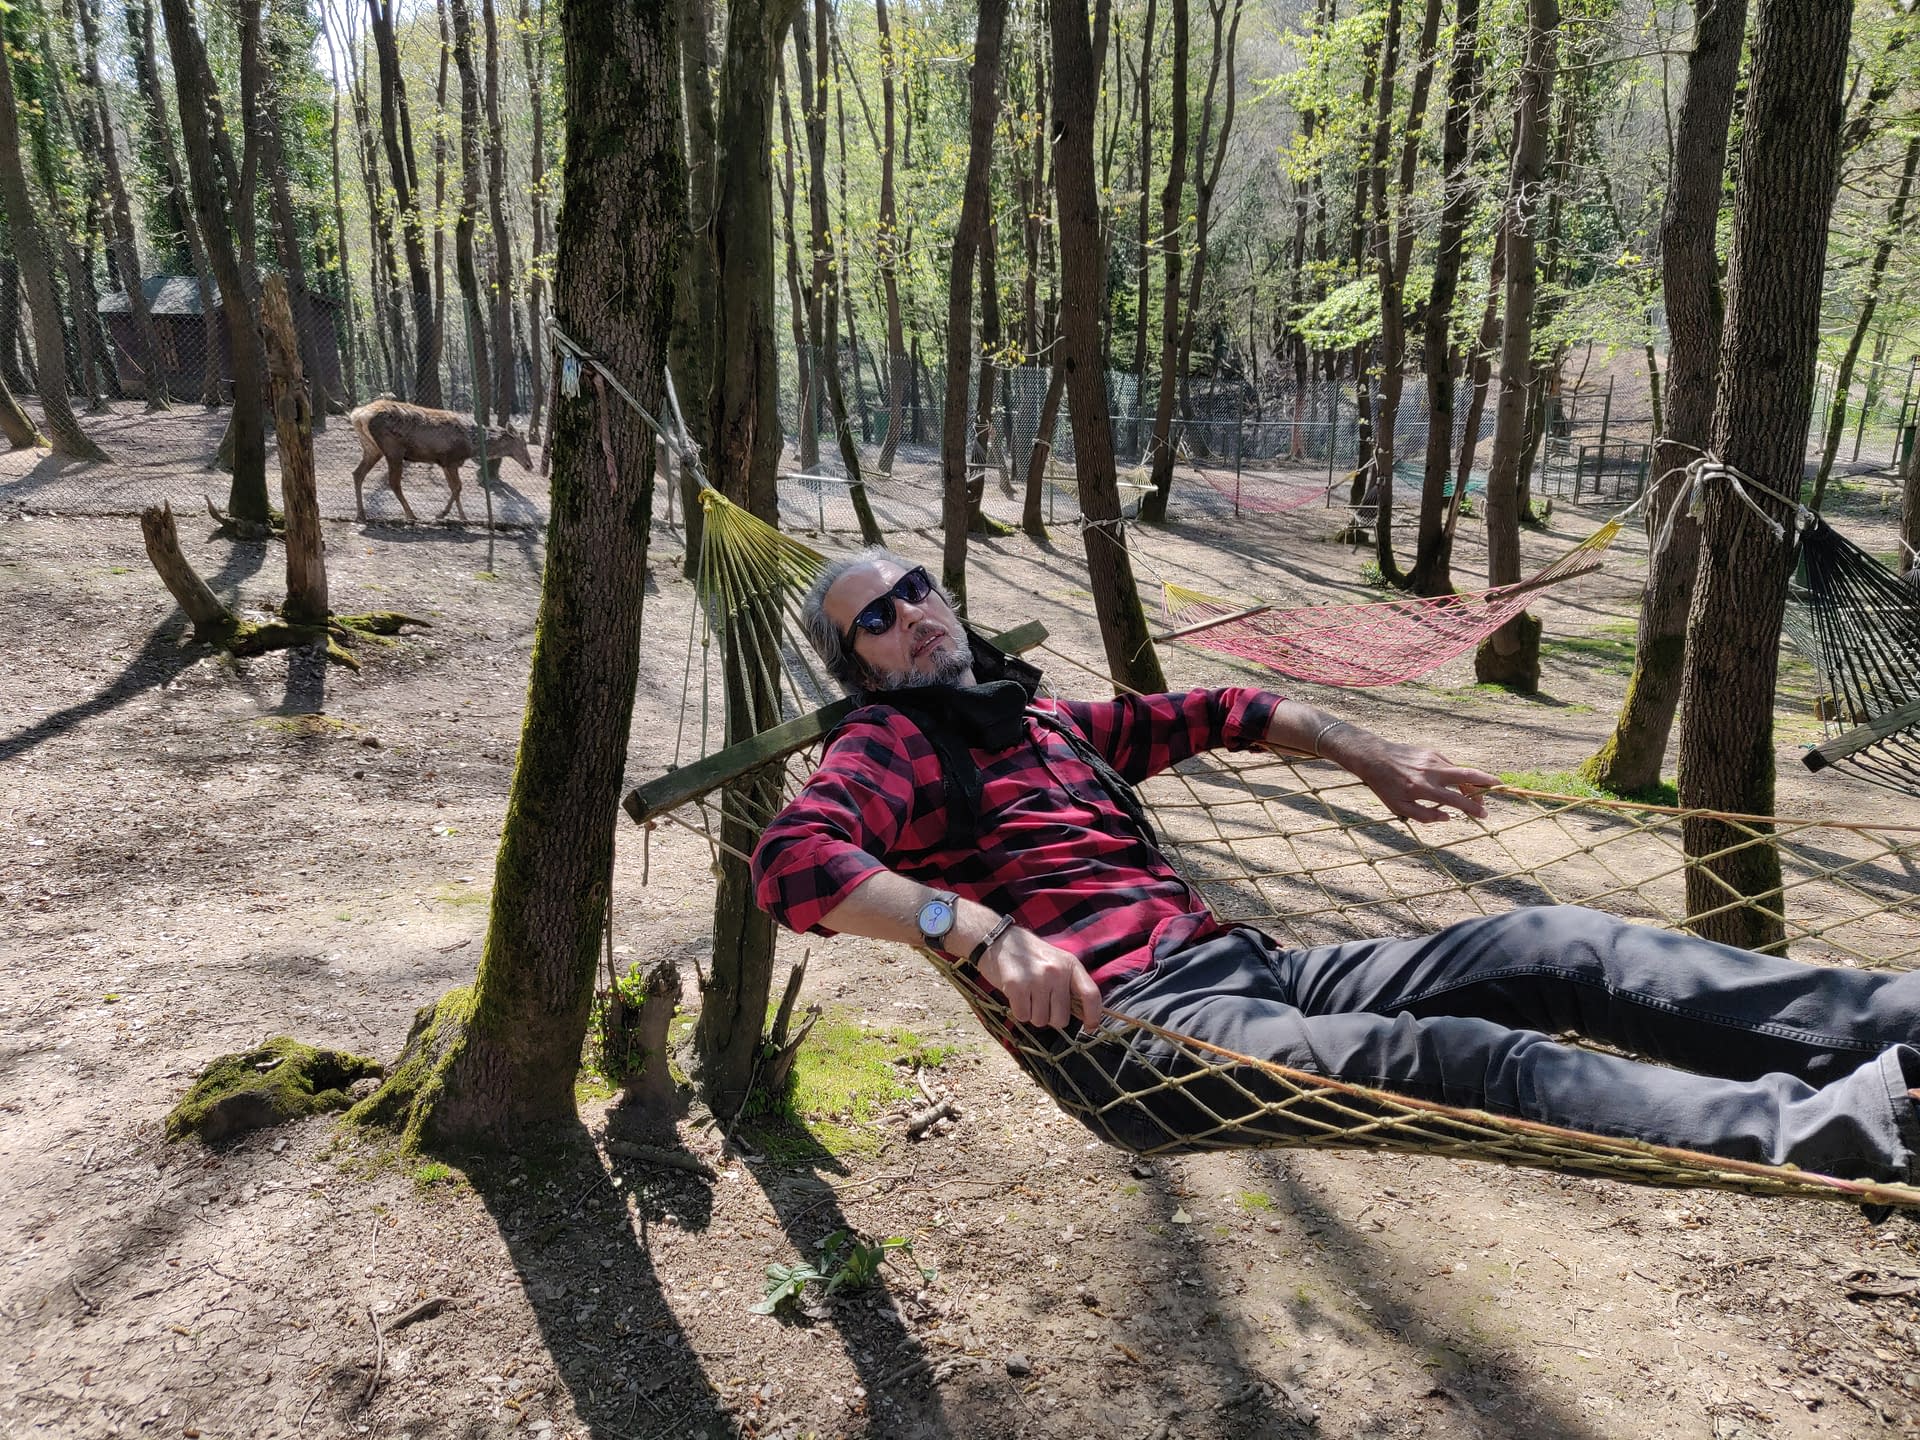 A relaxing and meditative moment of rest in the forest path in Polonezköy.